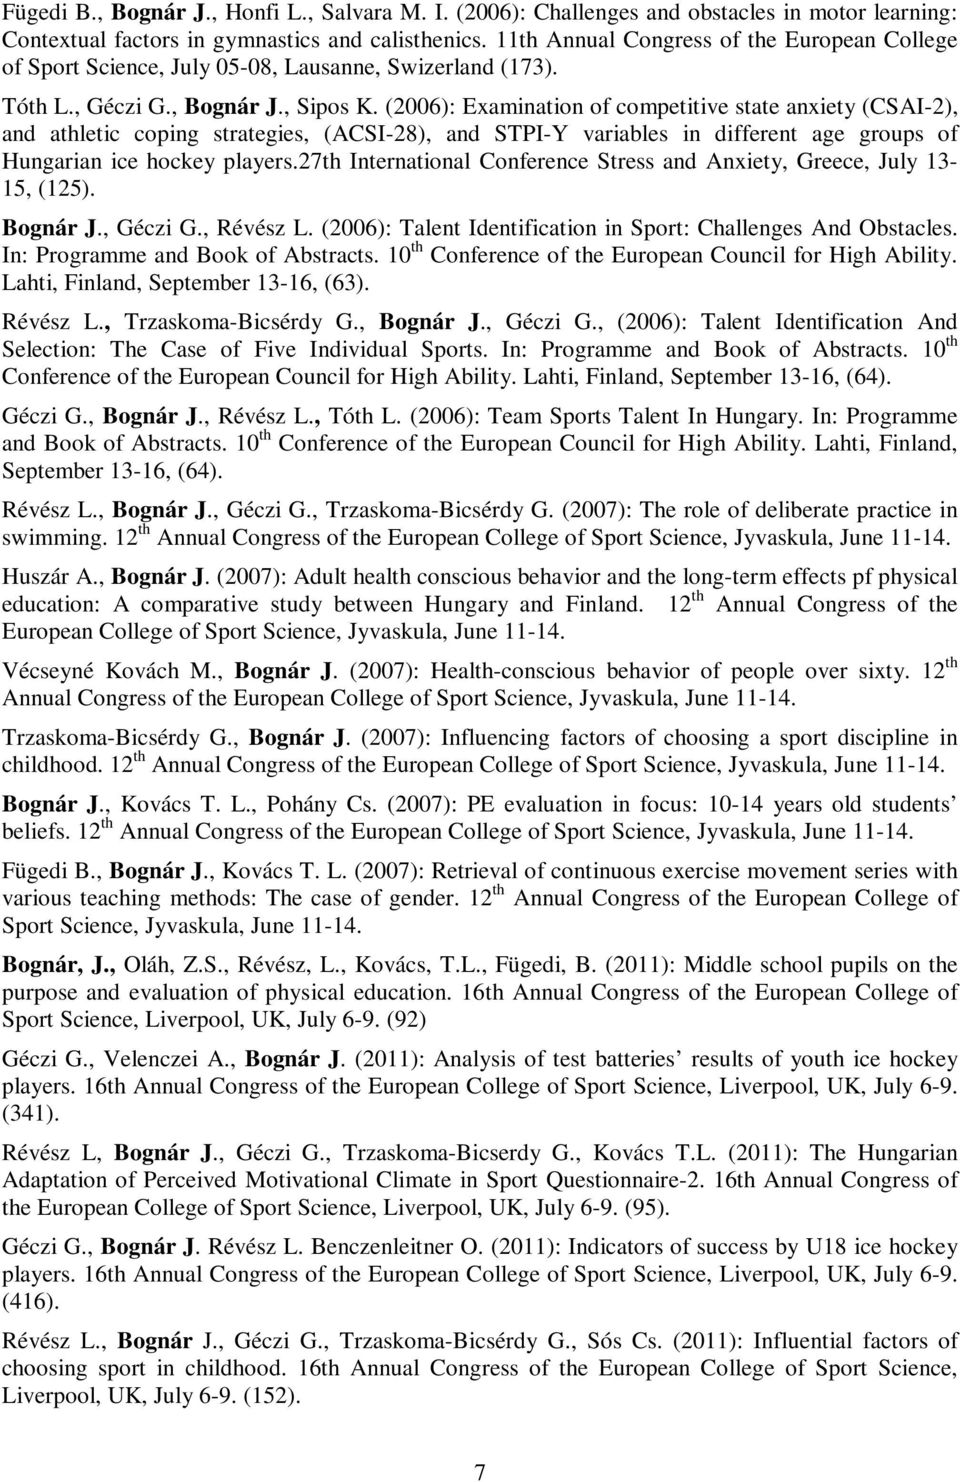 (2006): Examination of competitive state anxiety (CSAI-2), and athletic coping strategies, (ACSI-28), and STPI-Y variables in different age groups of Hungarian ice hockey players.